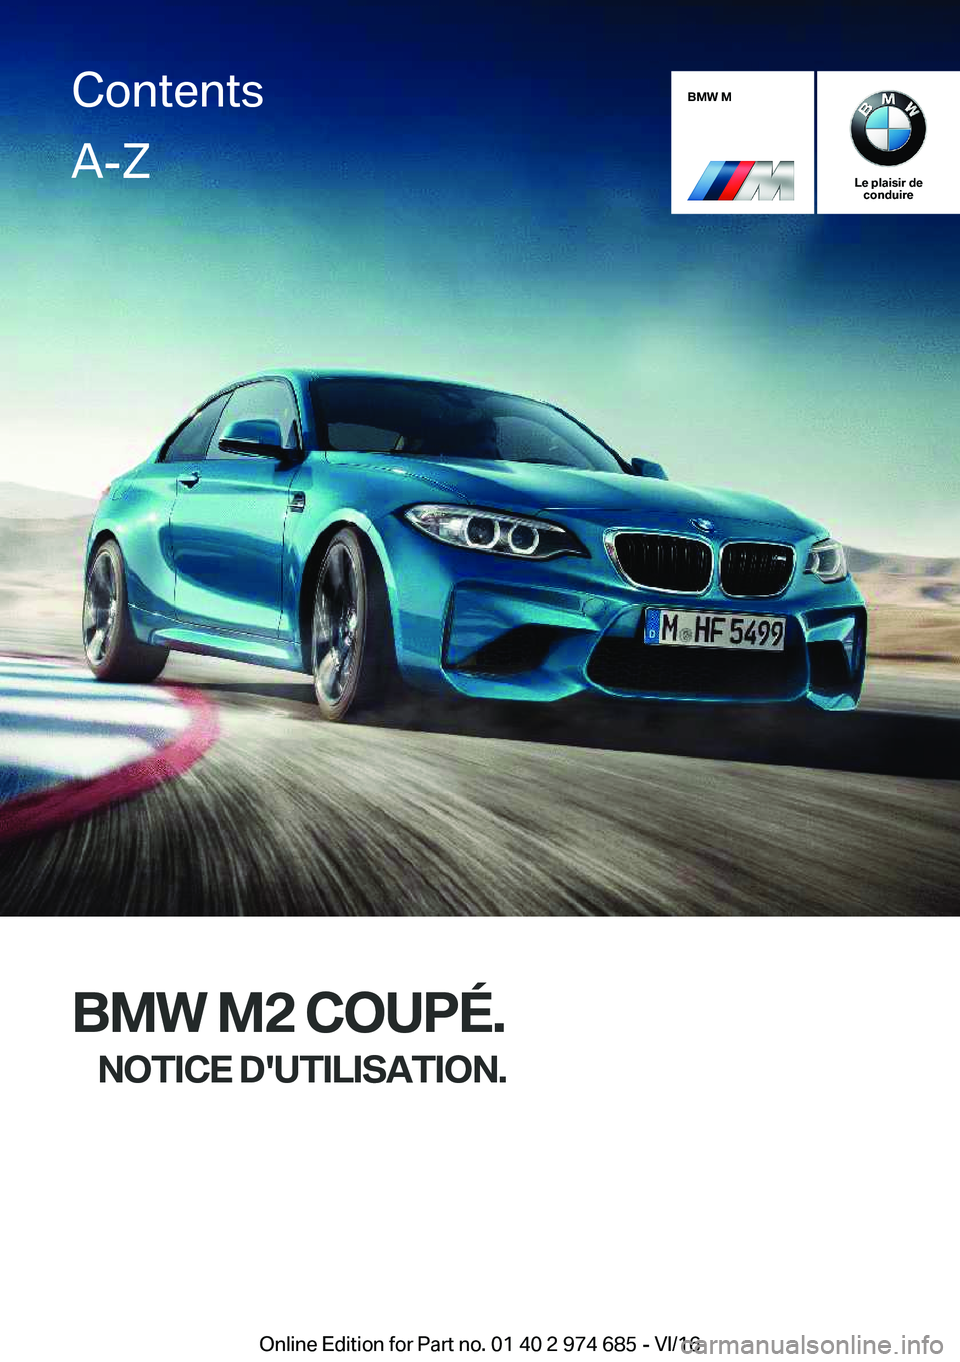 BMW M2 2017  Notices Demploi (in French) �B�M�W��M
�L�e��p�l�a�i�s�i�r��d�e�c�o�n�d�u�i�r�e
�B�M�W��M�2��C�O�U�P�